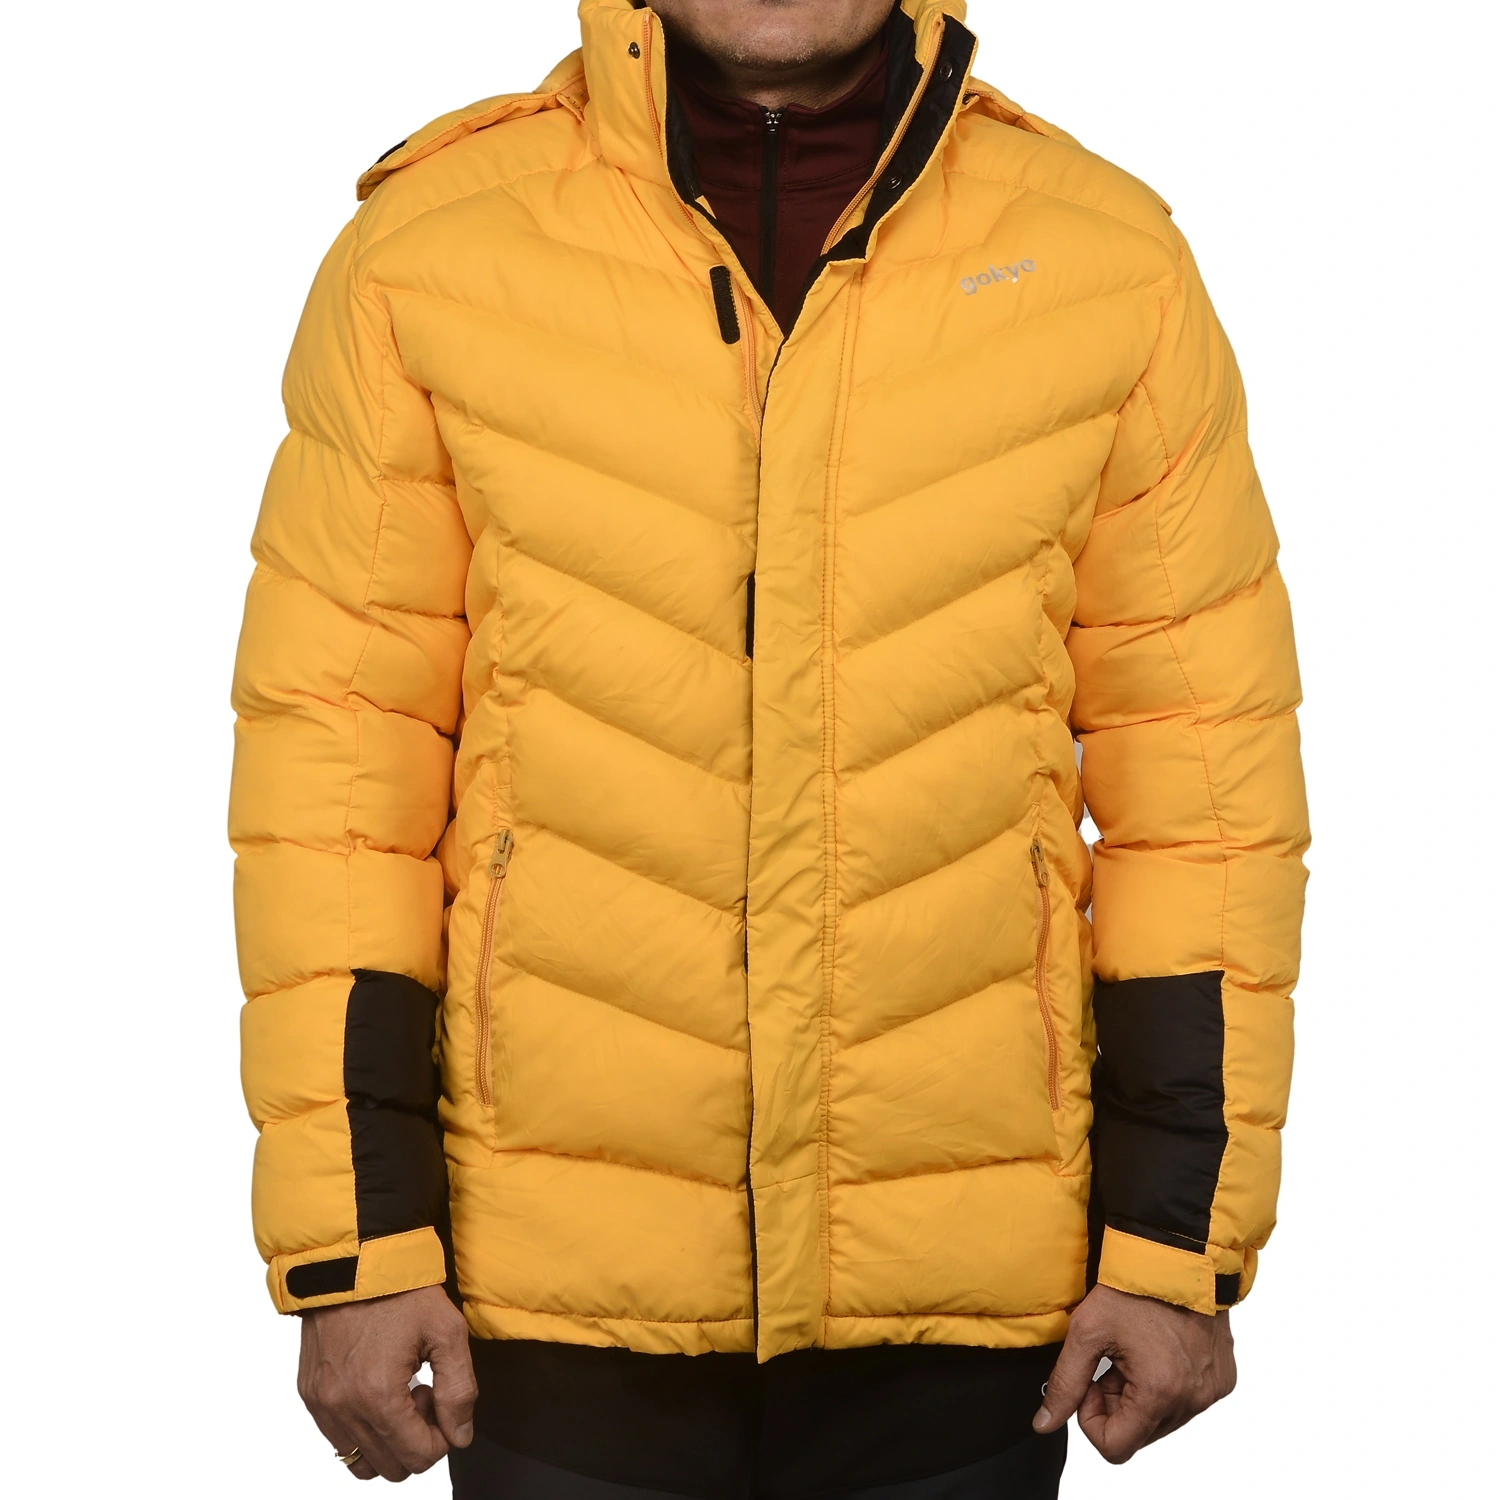 K2 Survivor Down Jacket for Men: Stylized Functionality for Extreme Cold Weather Expeditions (Up to -20°C)-230100